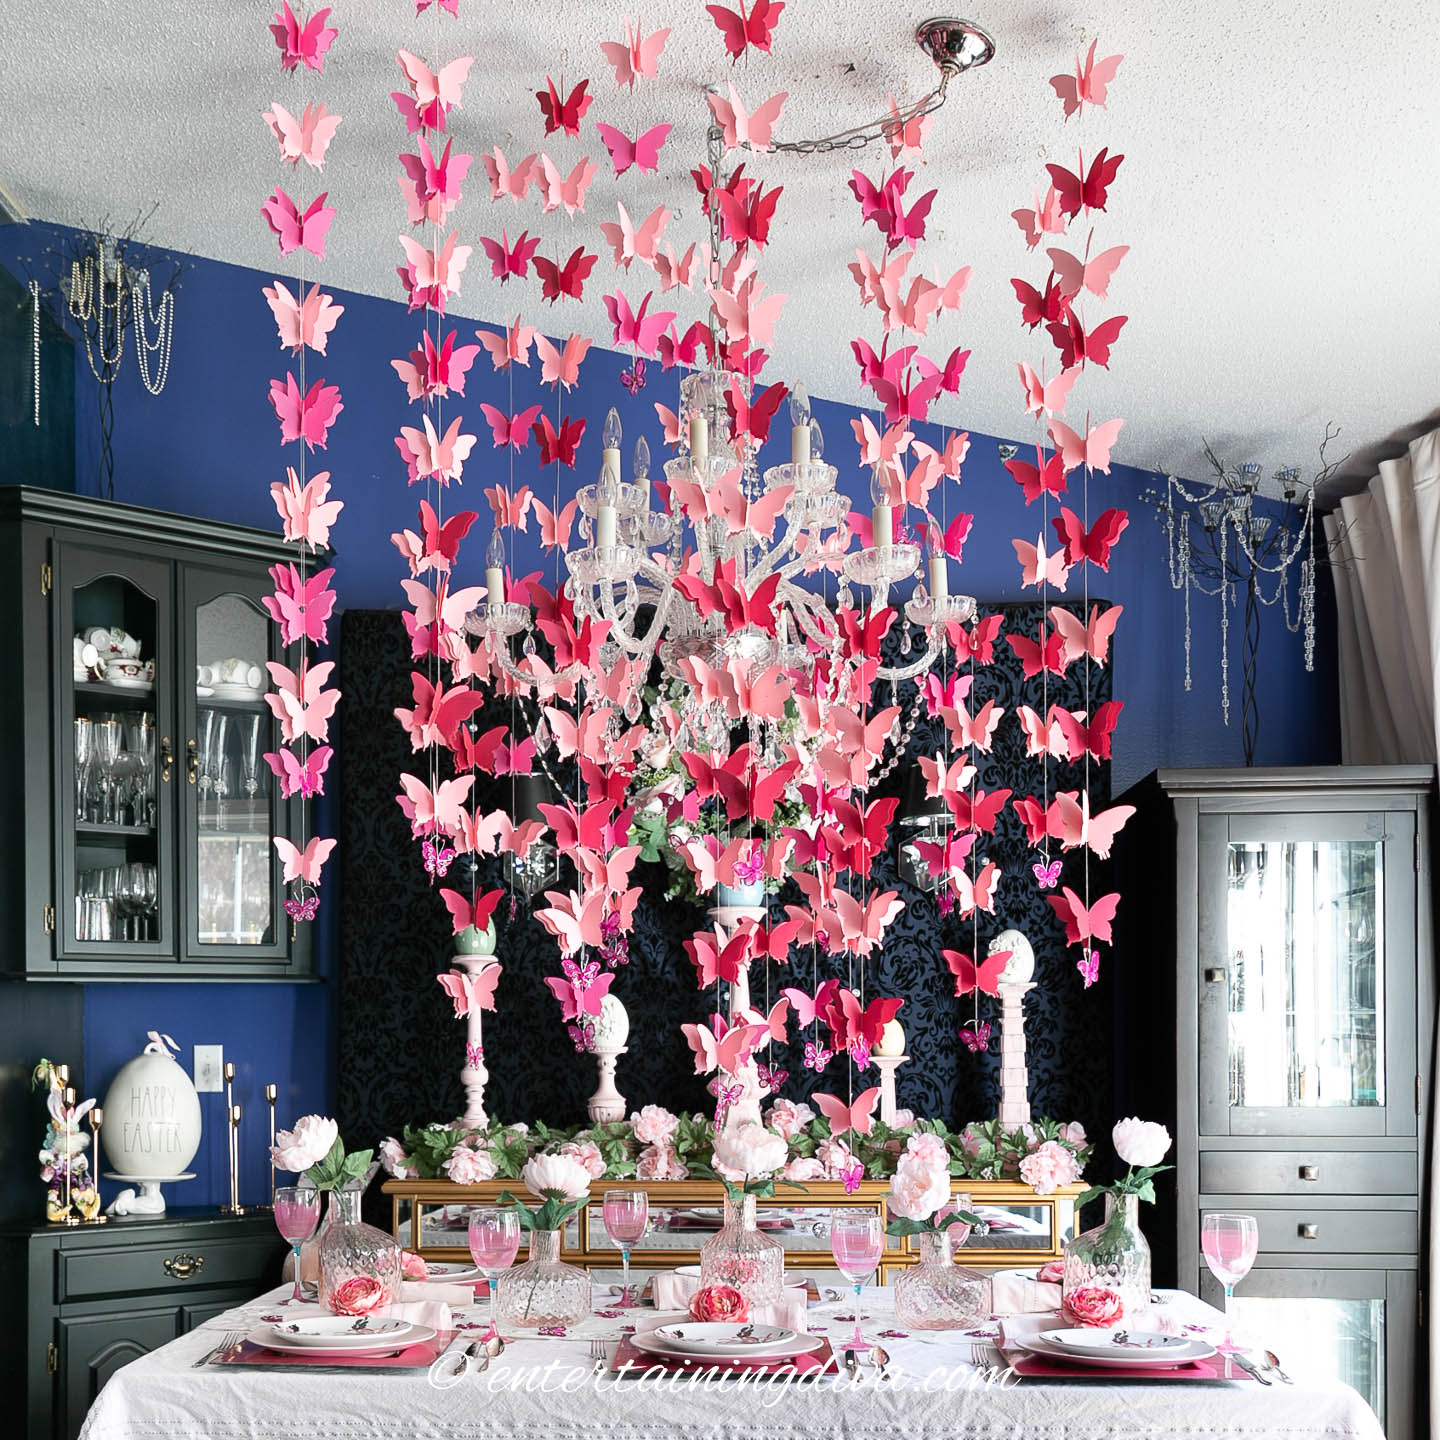 Pink butterflies hanging from the ceiling above a pink flowers and butterflies tablescape